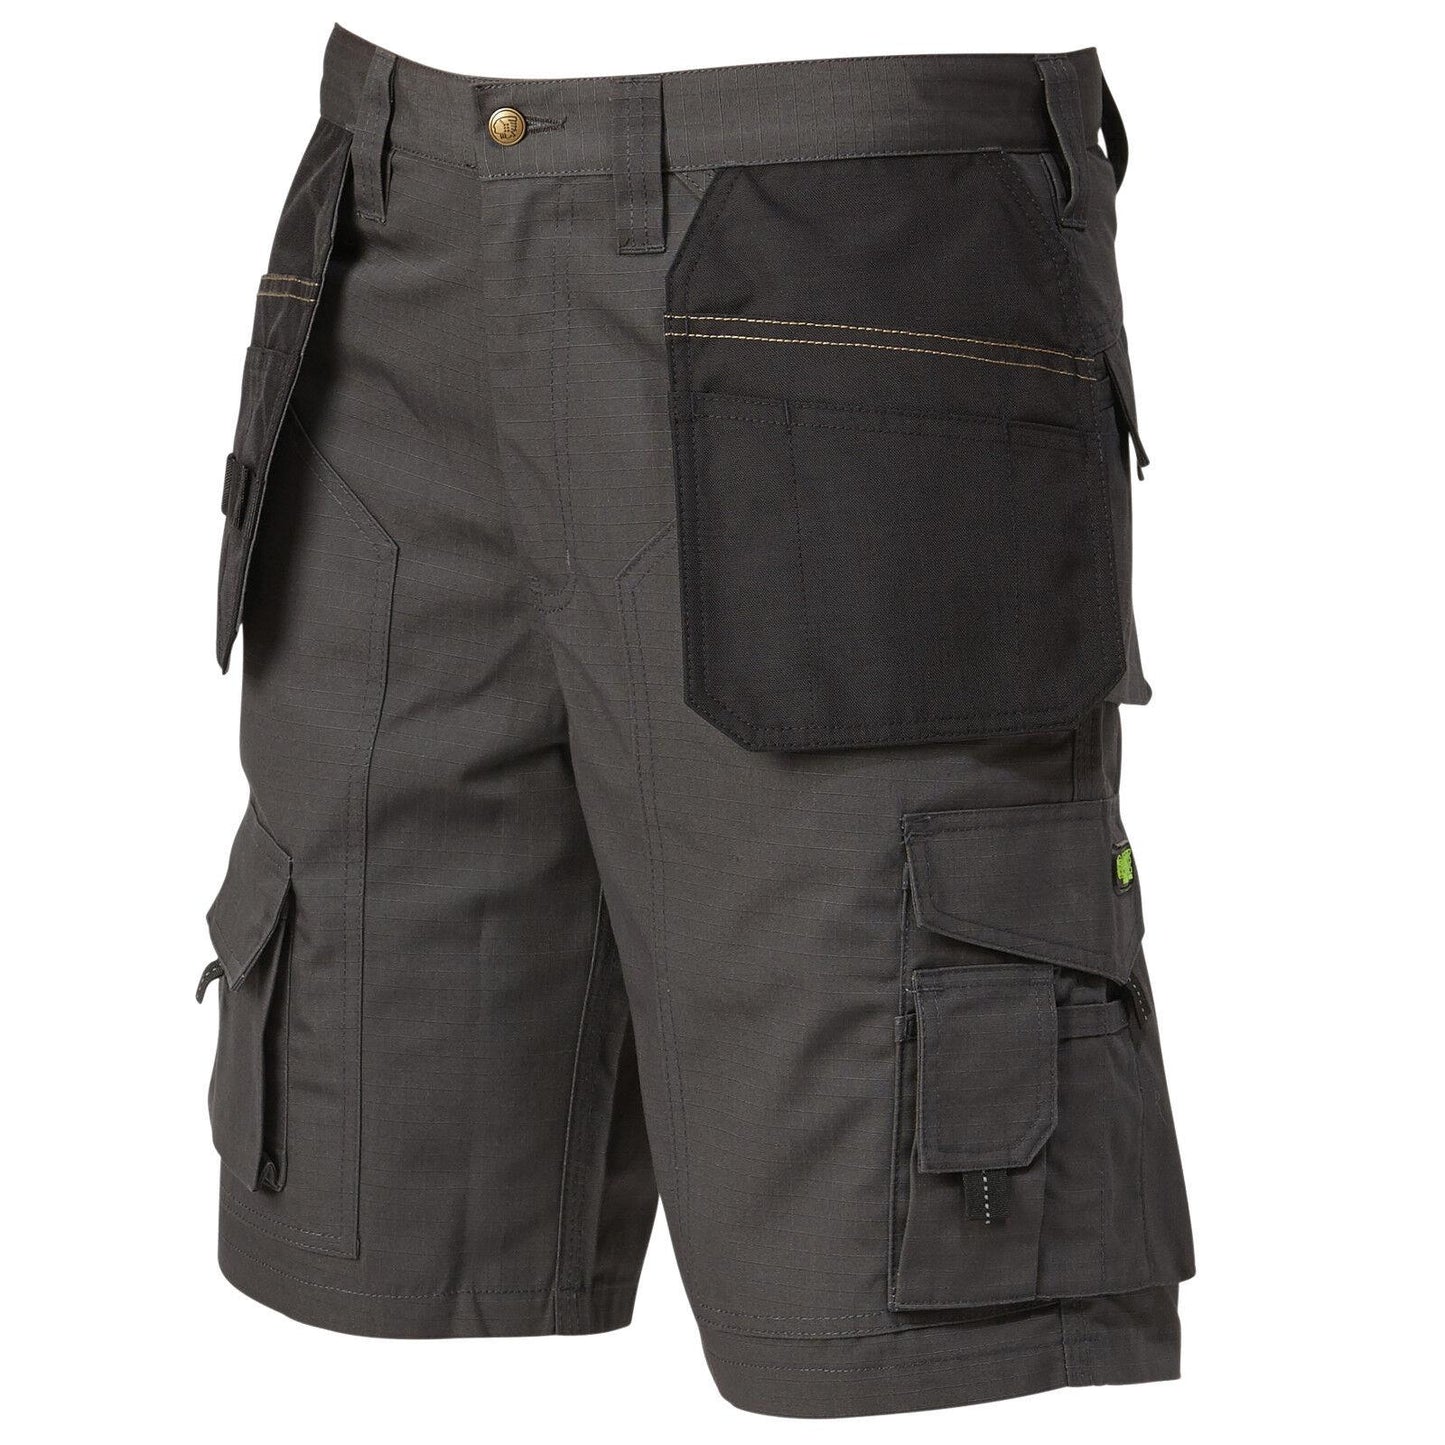 Apache Industrial Workwear Holster Pocket Low Rise Shorts Grey/Black APKHT